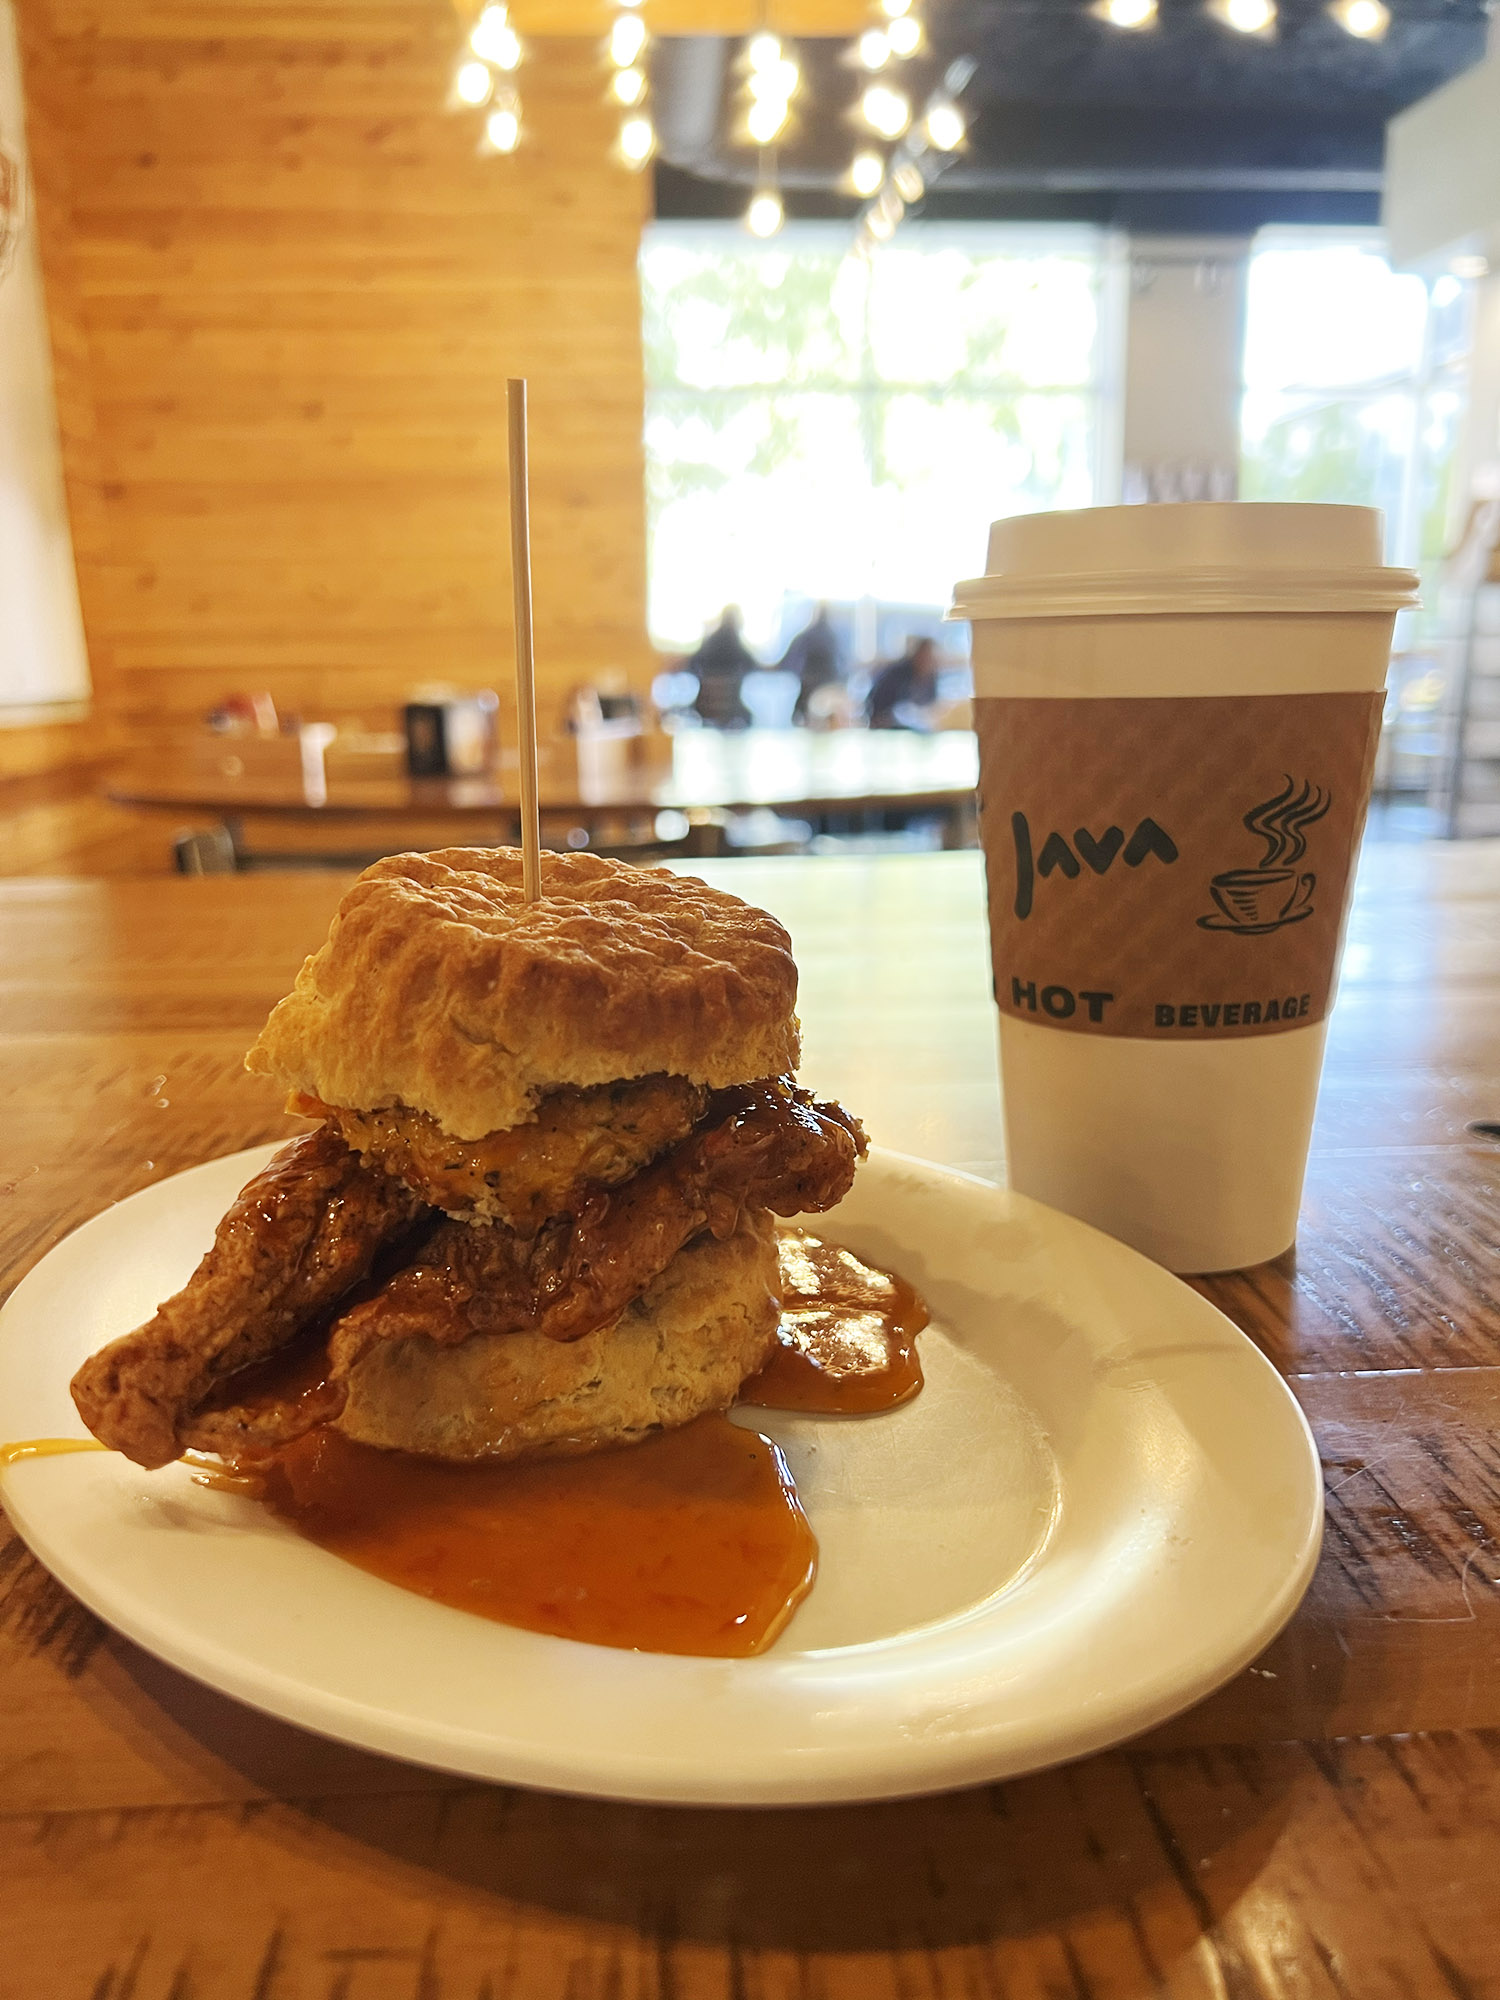 Greenville: The Squawking Goat at Maple Street Biscuit Company